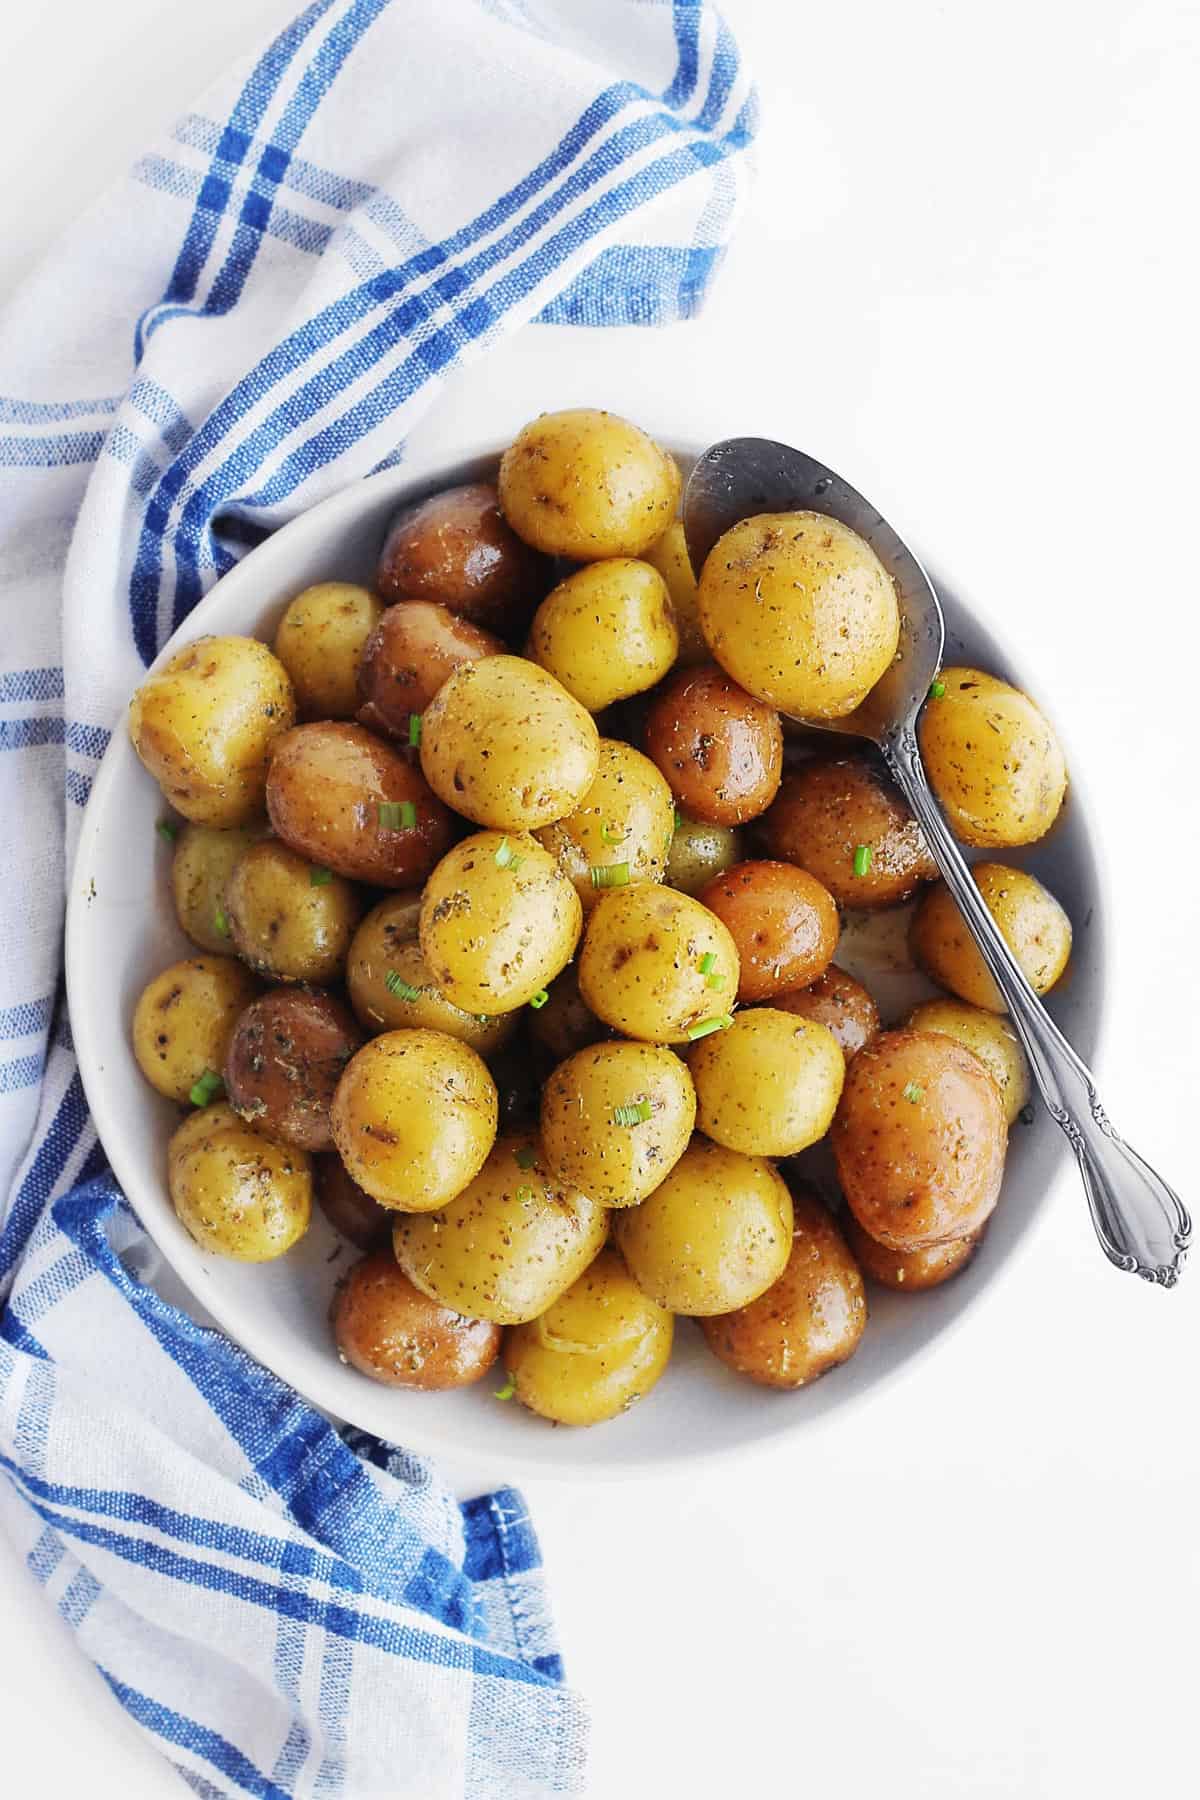 A photo of Instant Pot baby potatoes in a white bowl next to a blue and white plaid napkin.